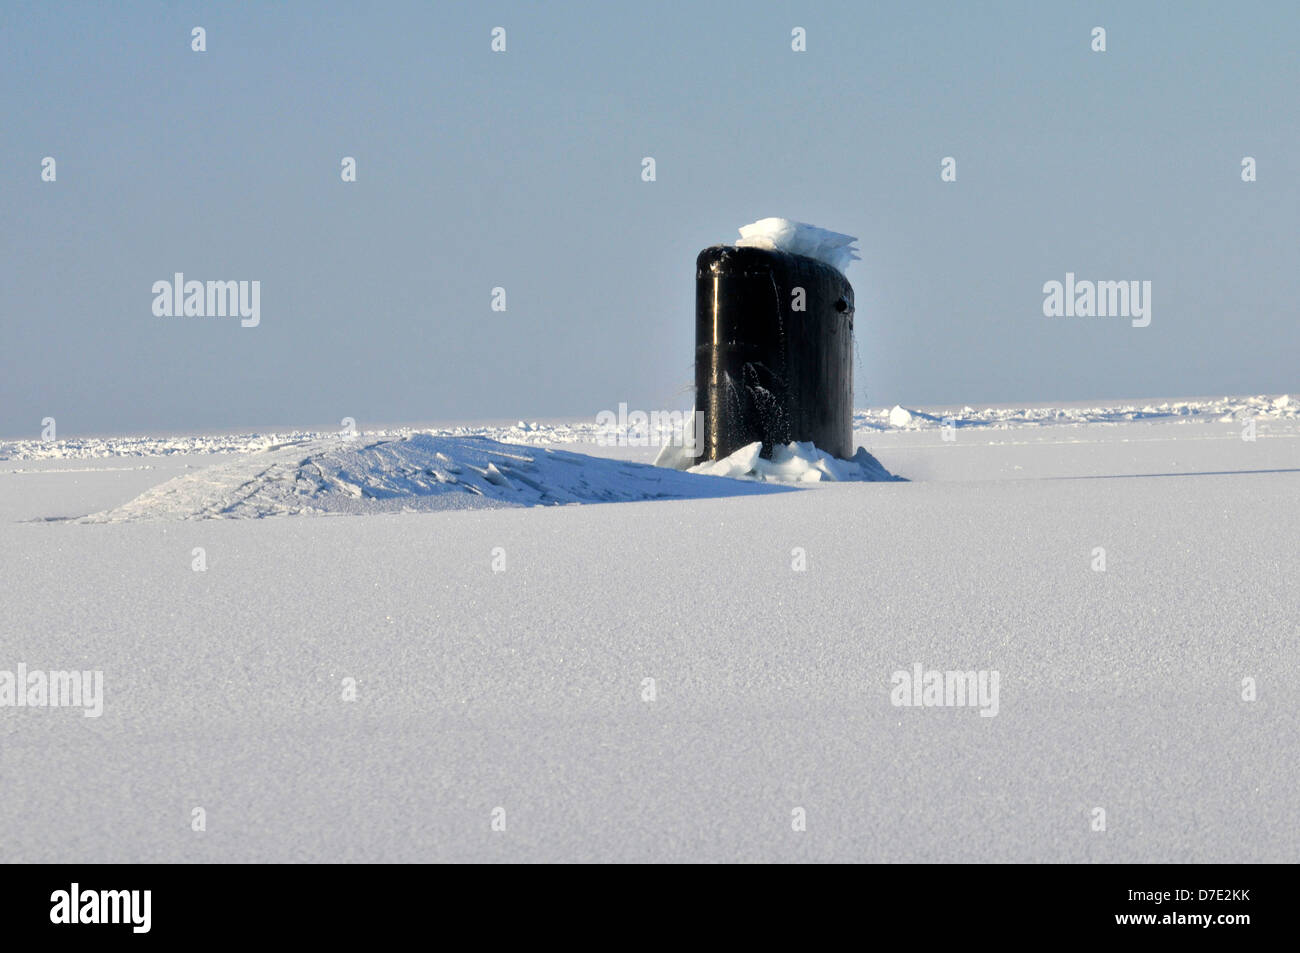 US Navy Los Angeles-class nuclear attack submarine USS Annapolis breaks through three feet of ice while participating in Ice Exercise March 21, 2009 in the Arctic Ocean. Stock Photo